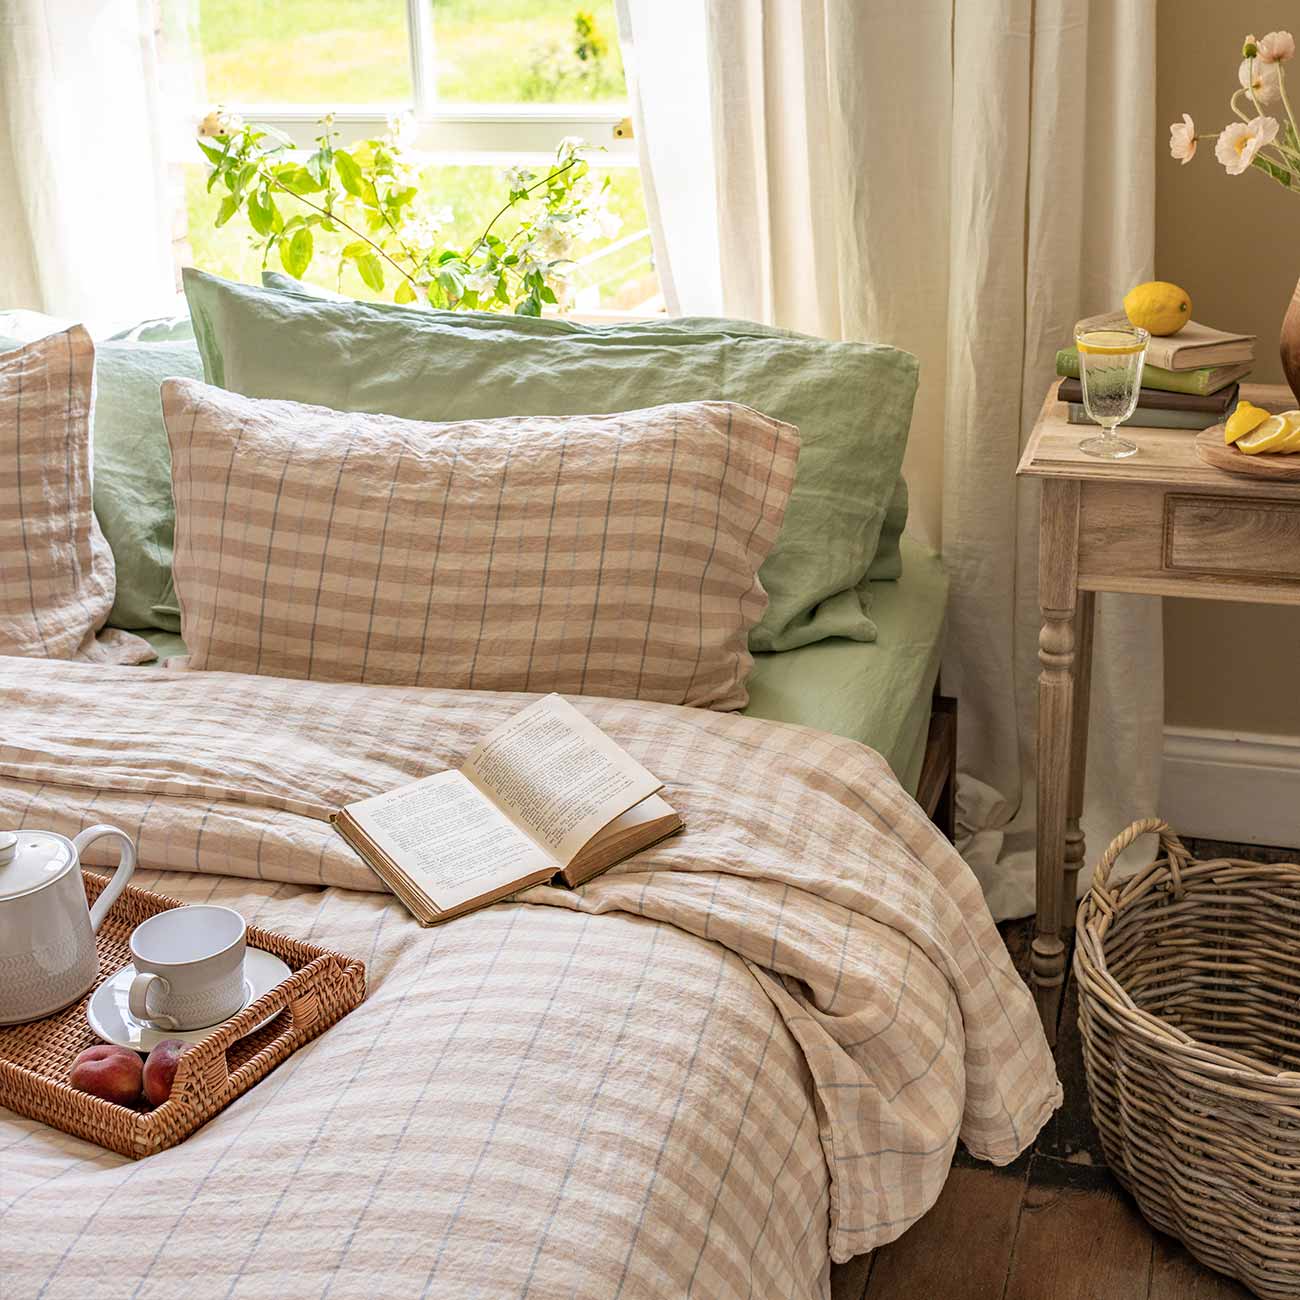 Cafe au Lait Check Stripe Duvet Cover, Flat Sheet and Pillowcases, Sage Green Fitted Sheet and Pillowcases